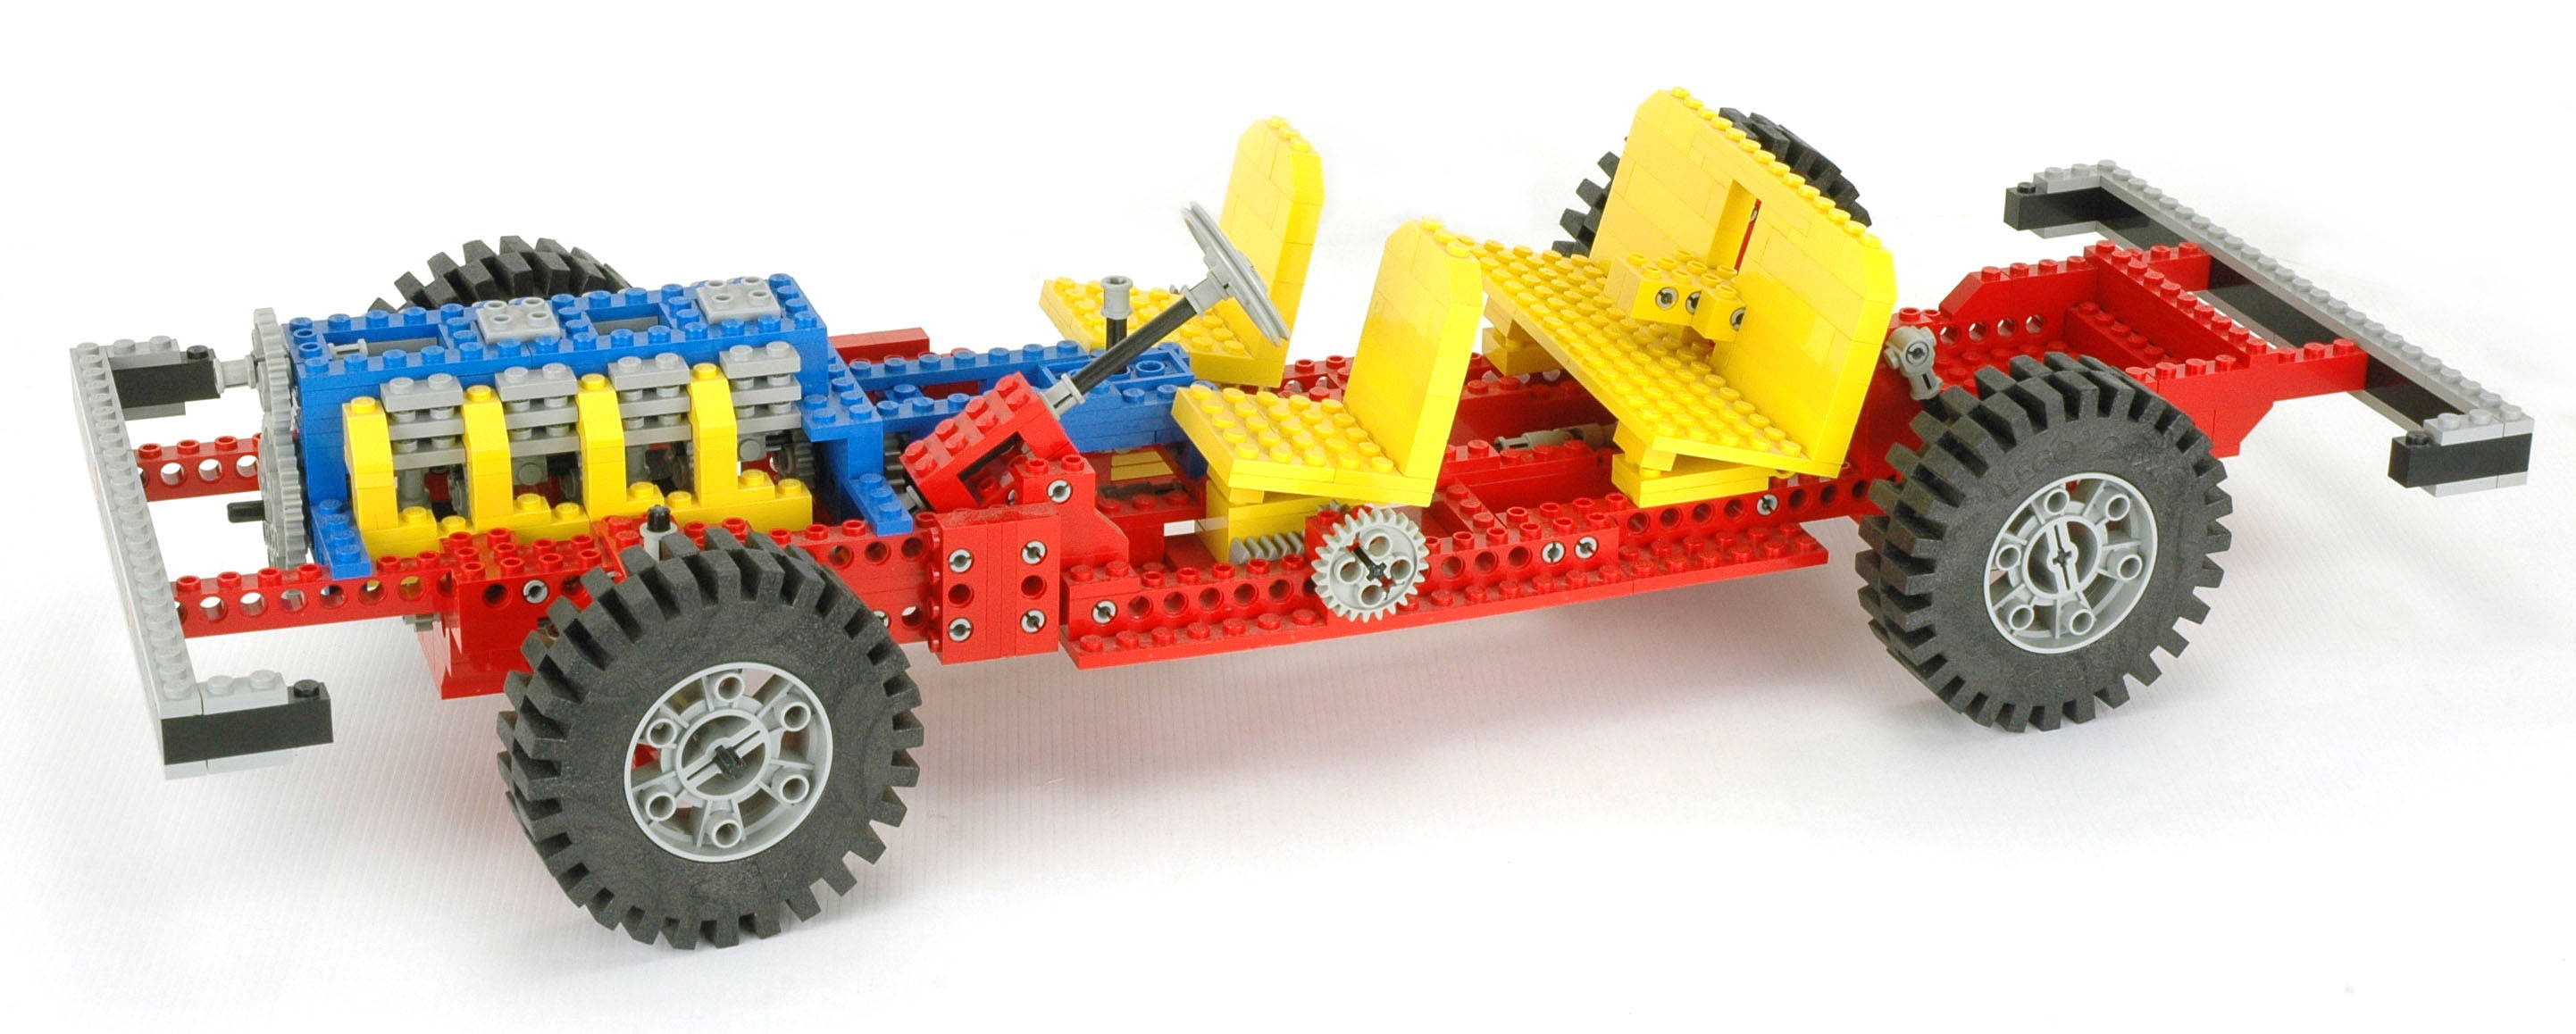 LEGO Car Chassis 853 